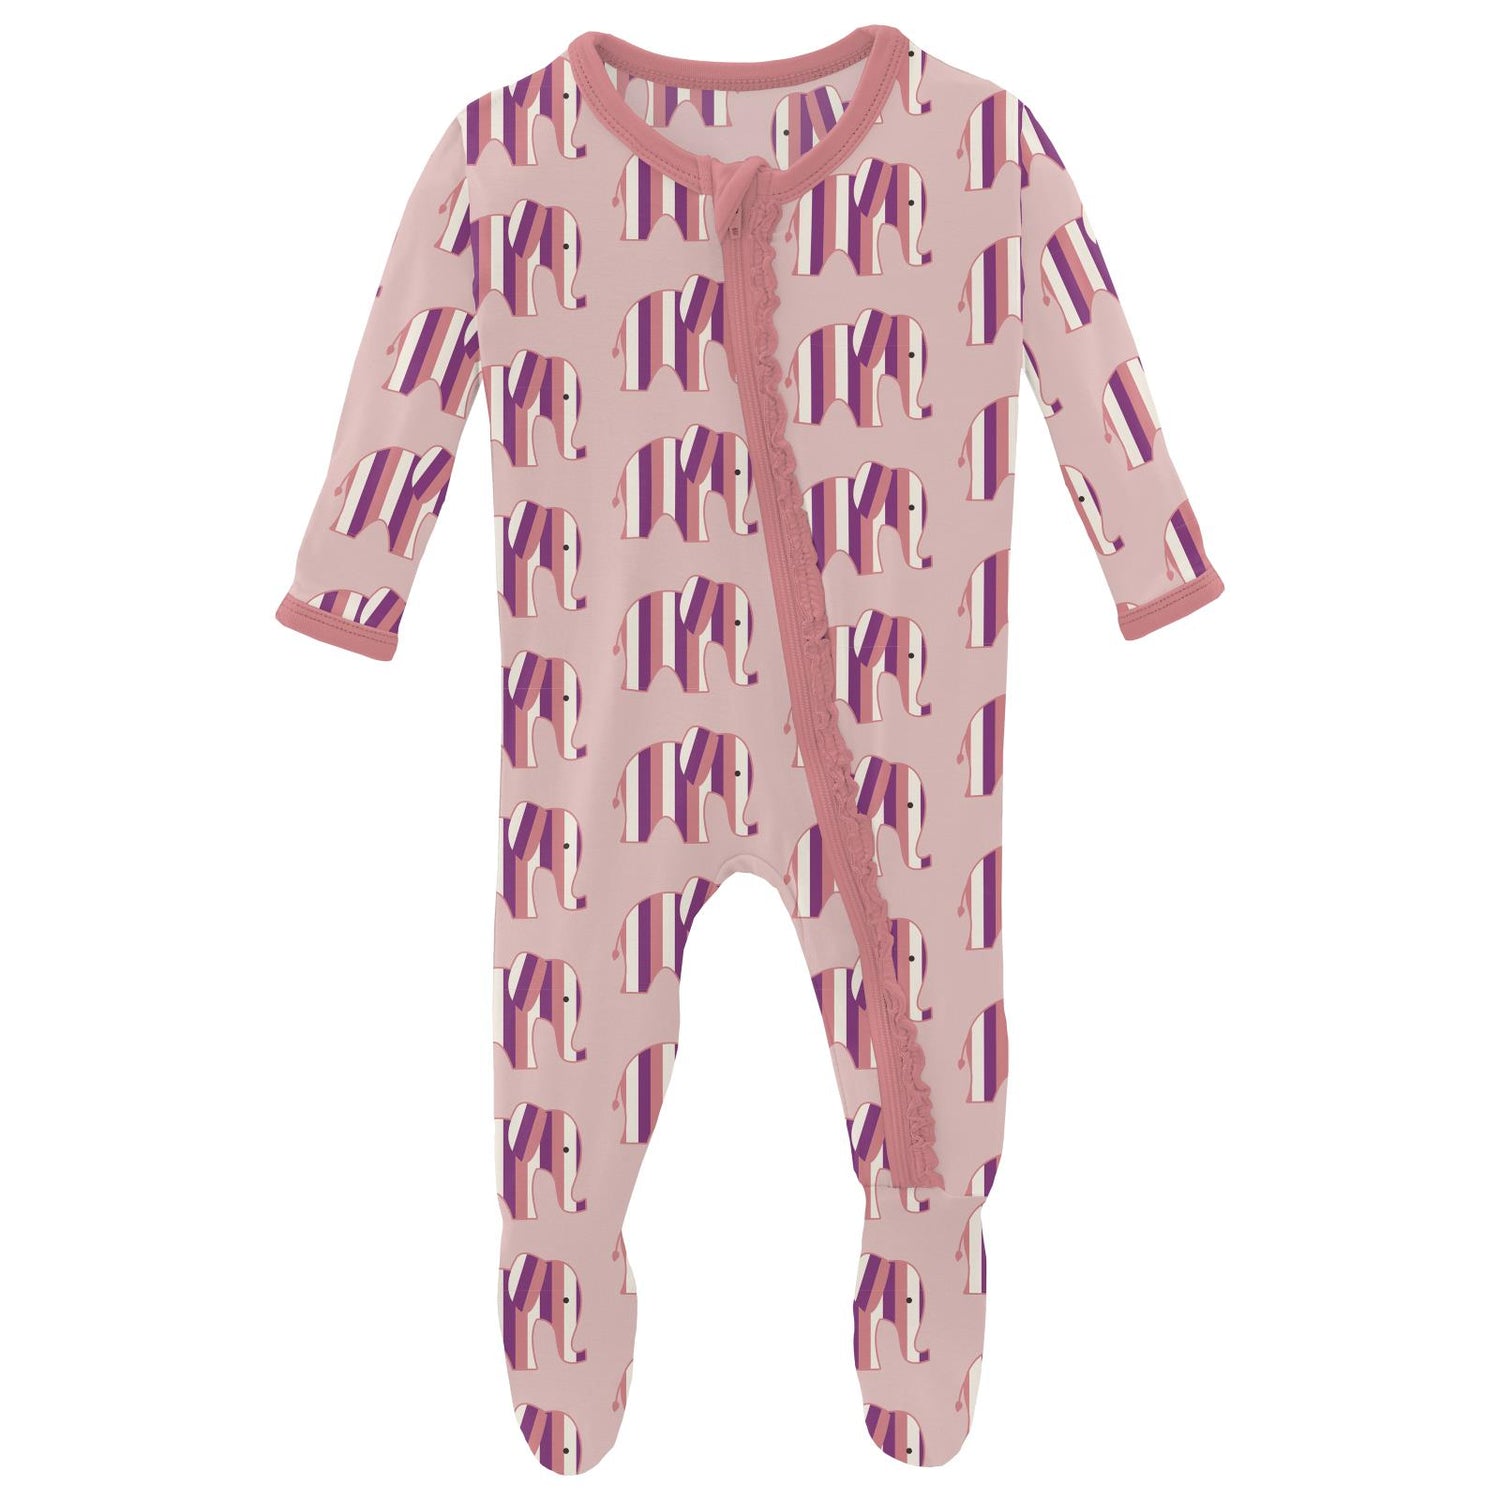 Print Muffin Ruffle Footie with Zipper in Baby Rose Elephant Stripe